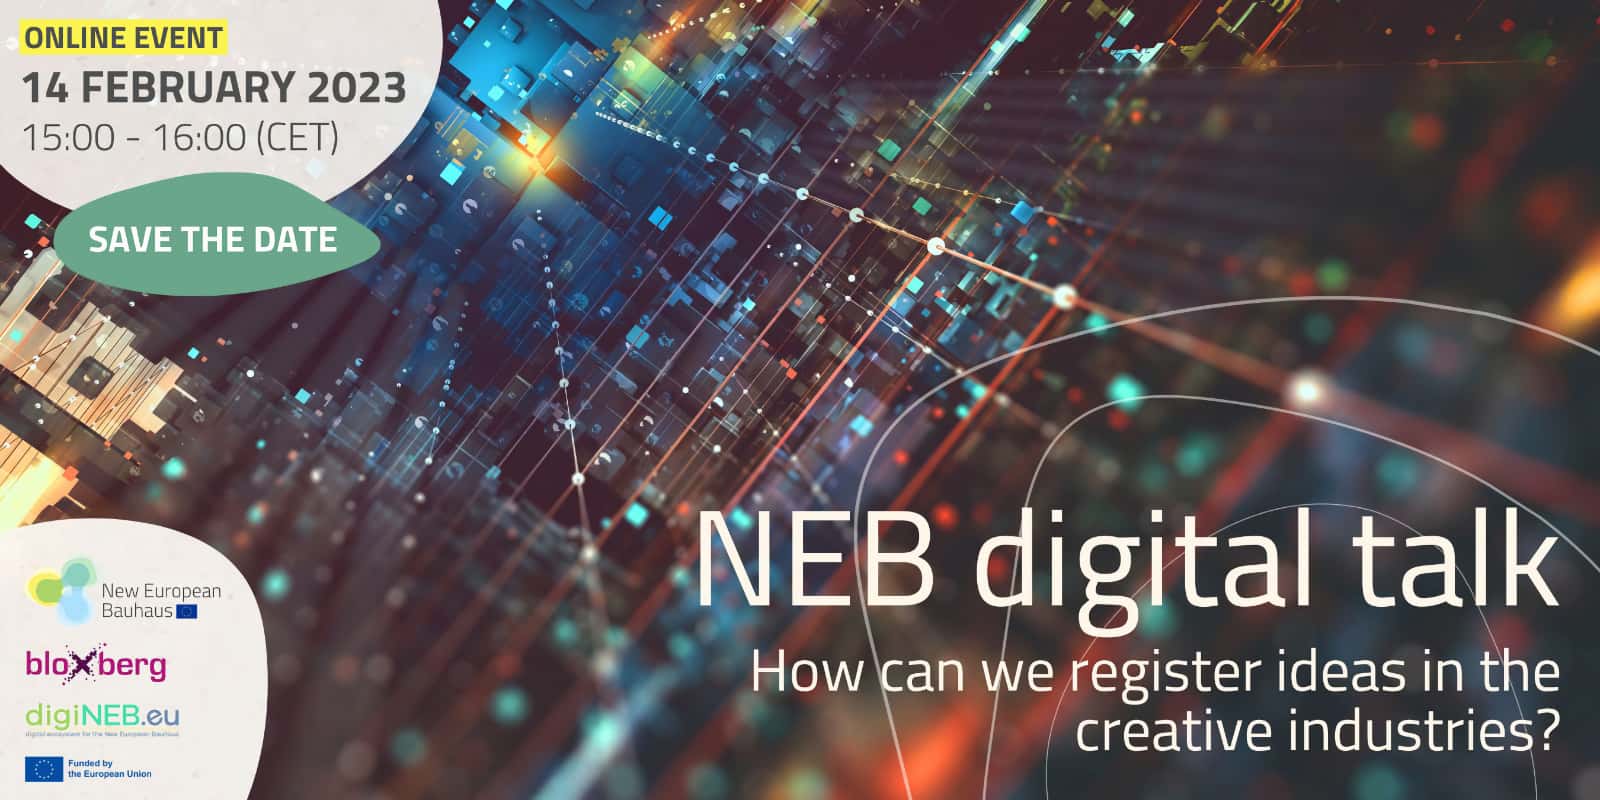 NEB Digital Talk: How can we register ideas in the creative industries?